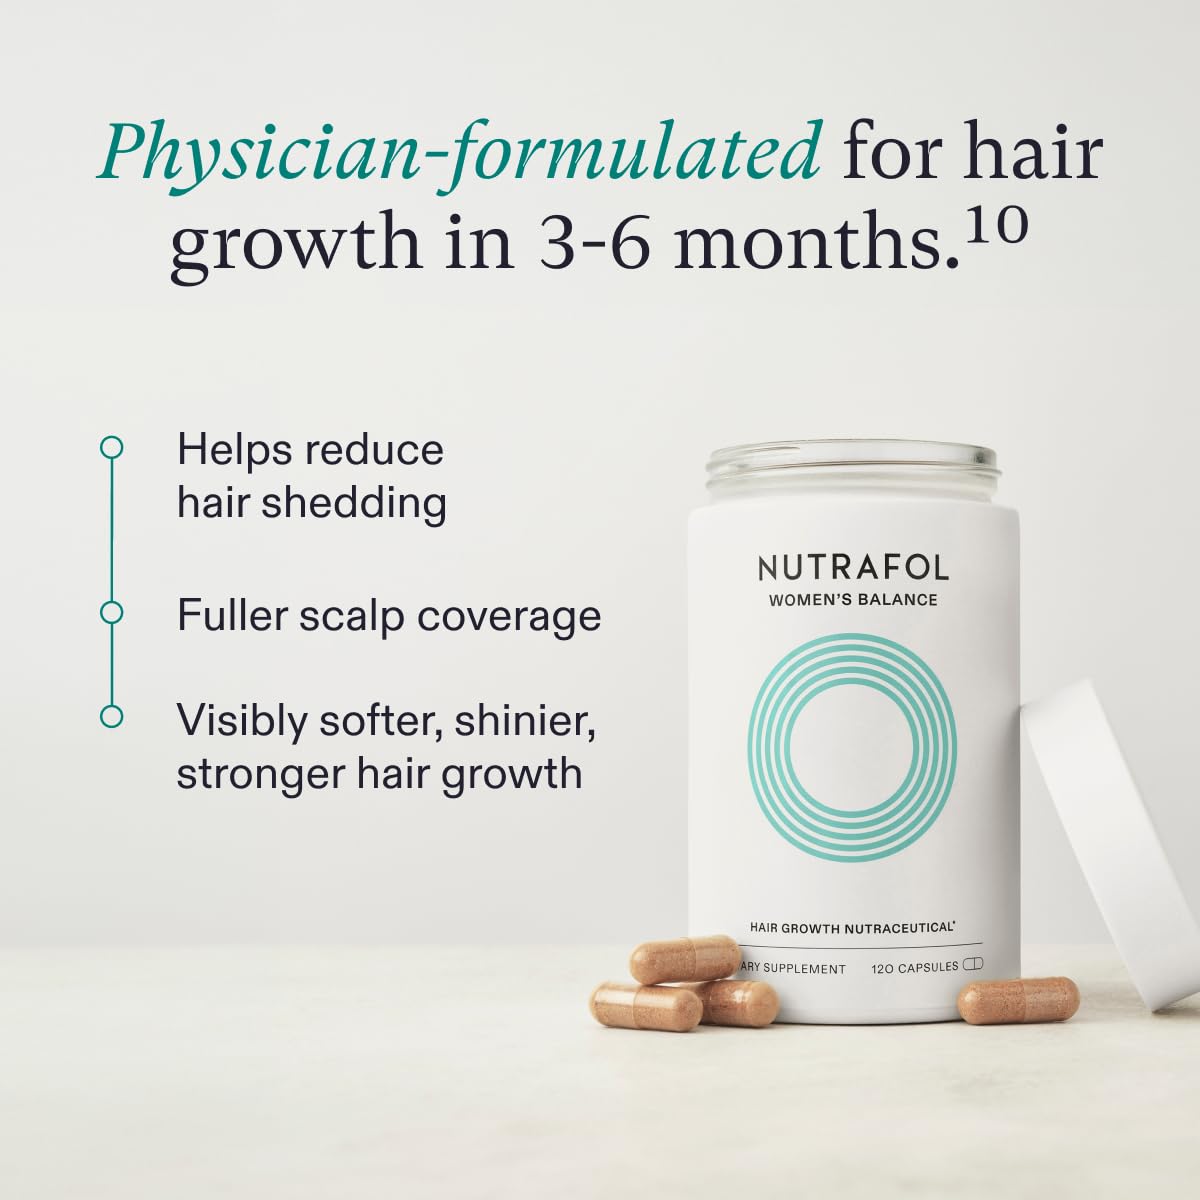 Nutrafol Women's Balance Hair Growth Supplements, Ages 45 and Up, Clinically Proven Hair Supplement for Visibly Thicker Hair and Scalp Coverage, Dermatologist Recommended - 1 Month Supply, 1 Refill Pouch